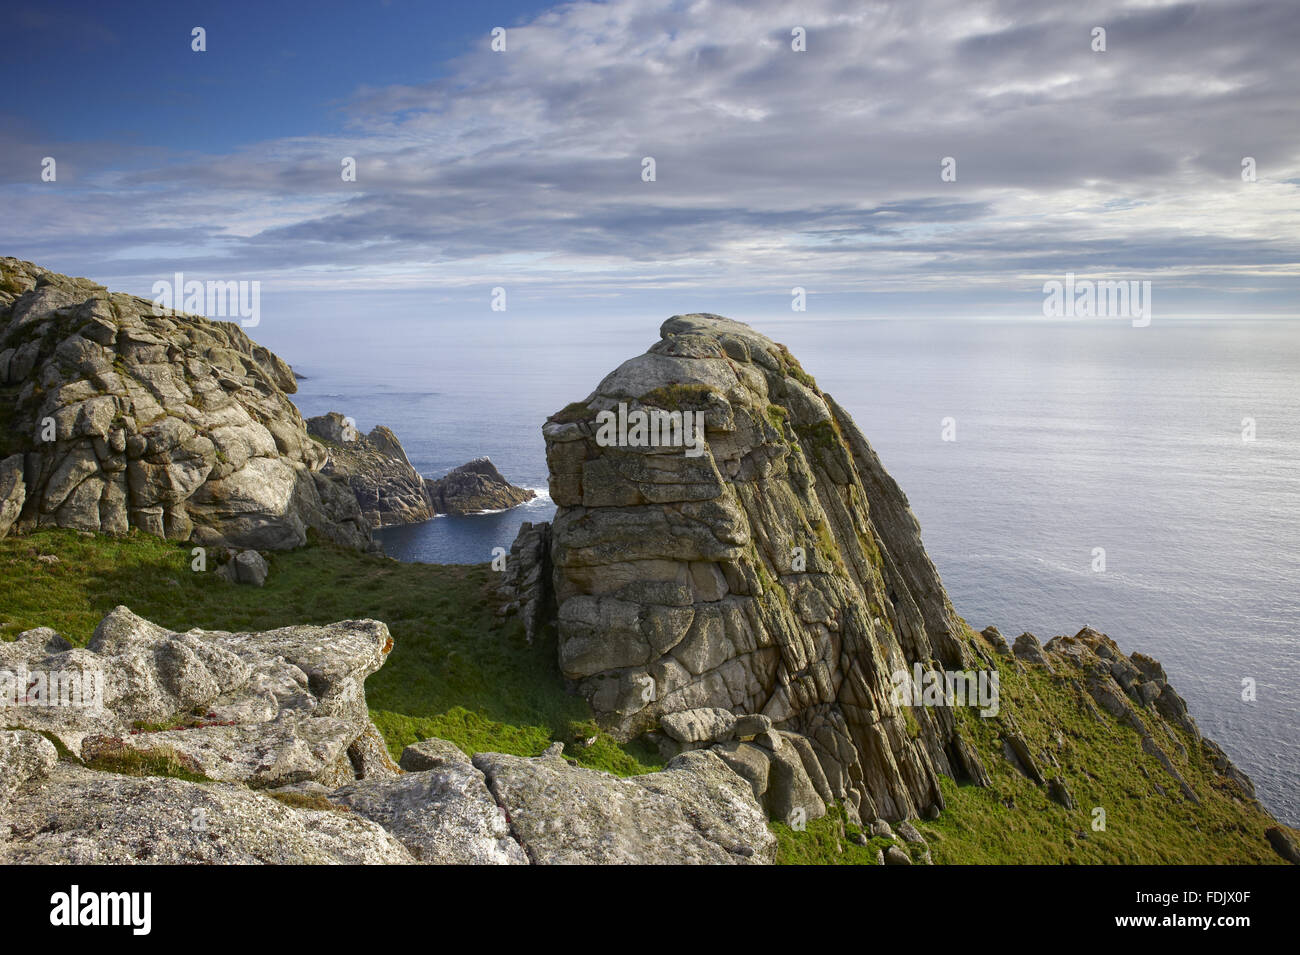 Granite stacks on the west coast of Lundy. The island is a Site of Special Scientific Interest, 18 kilometres off the north Devon coast, and is owned by The National Trust, but is financed, administered and maintained by the Landmark Trust. Stock Photo